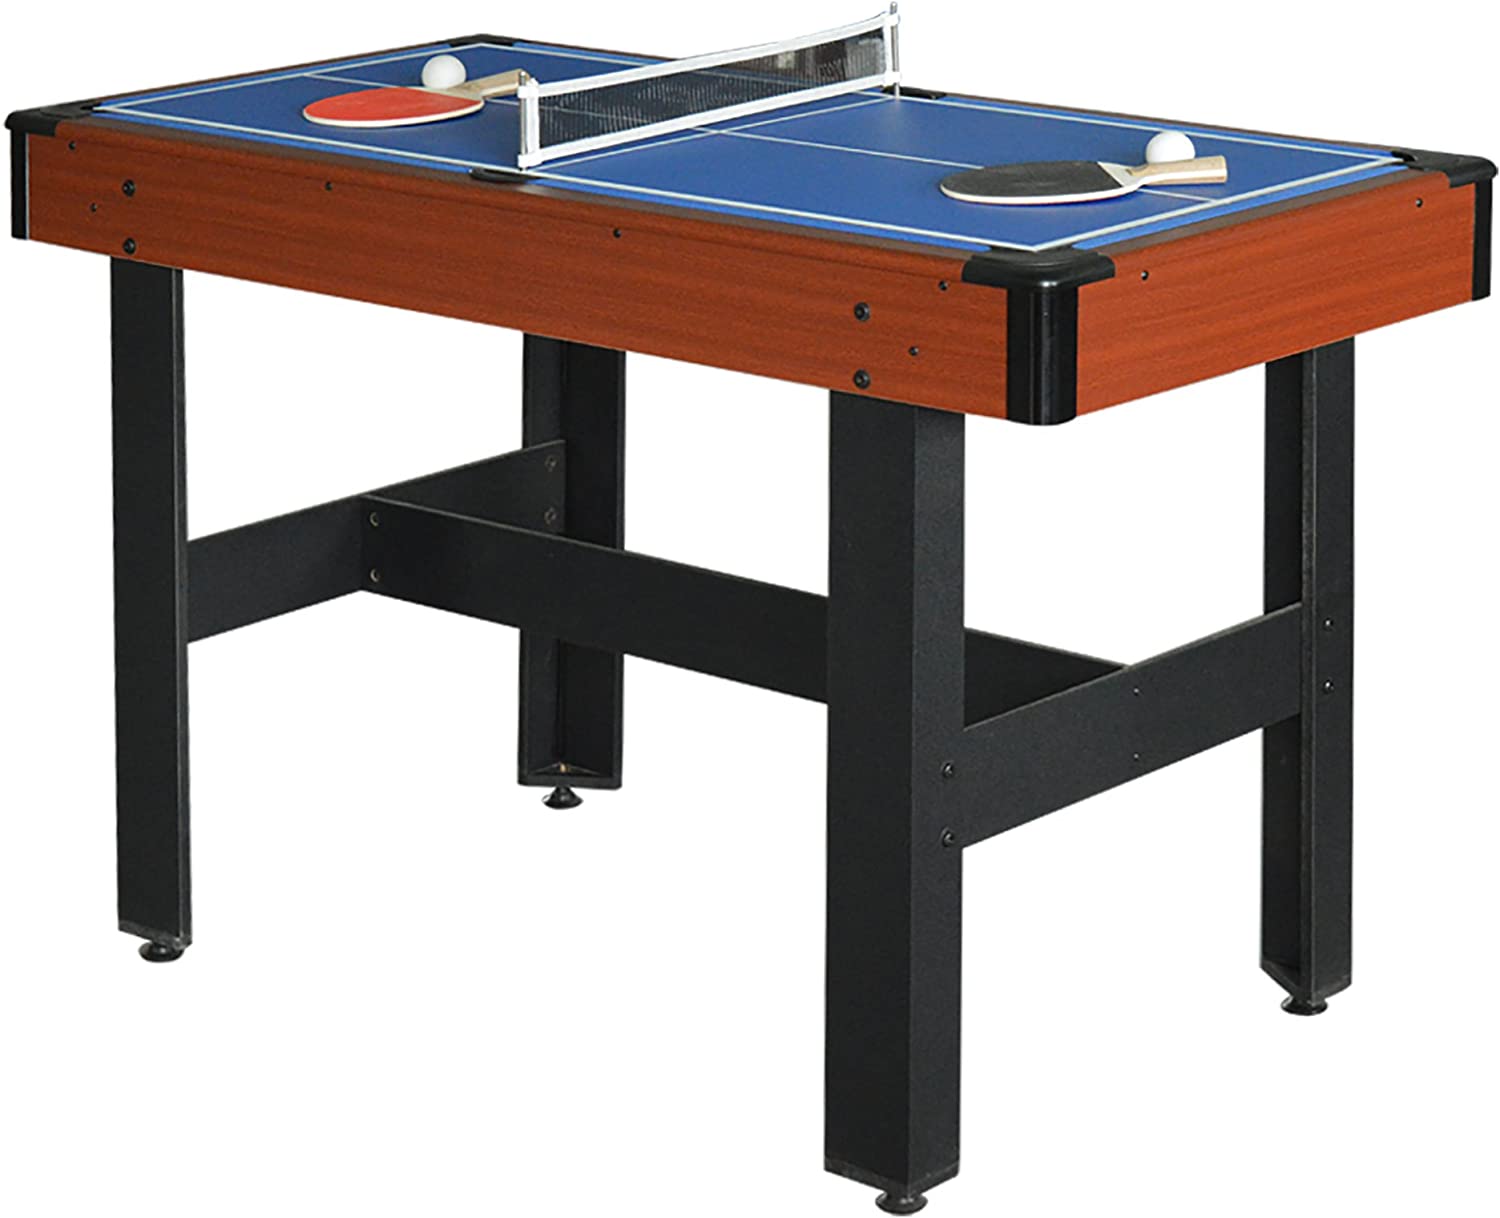 Hathaway BG1131M Triad 3-in-1 48-in Multi Game Table with Pool, Glide Hockey, and Table Tennis for Family Game Rooms,Blue